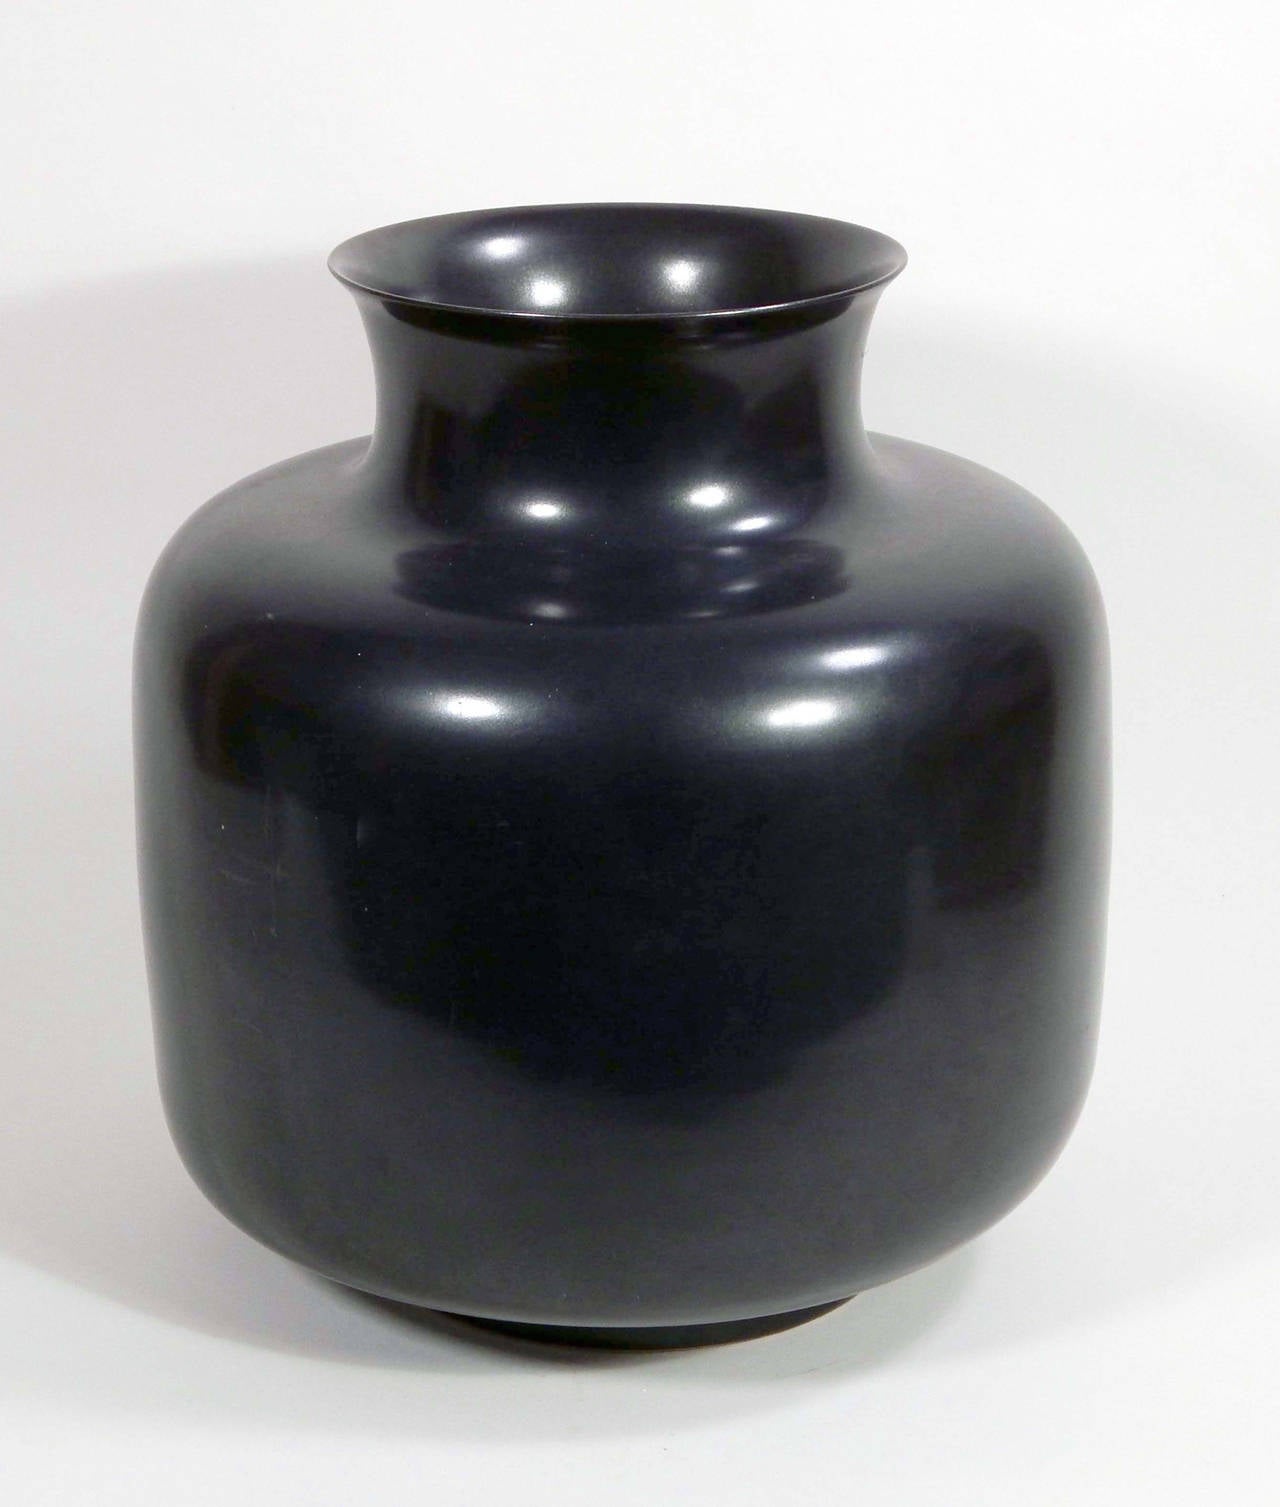 Large sensual black Asian pot in a soft, almost gunmetal glaze. Very good condition with only a few slight scratches that barely show.